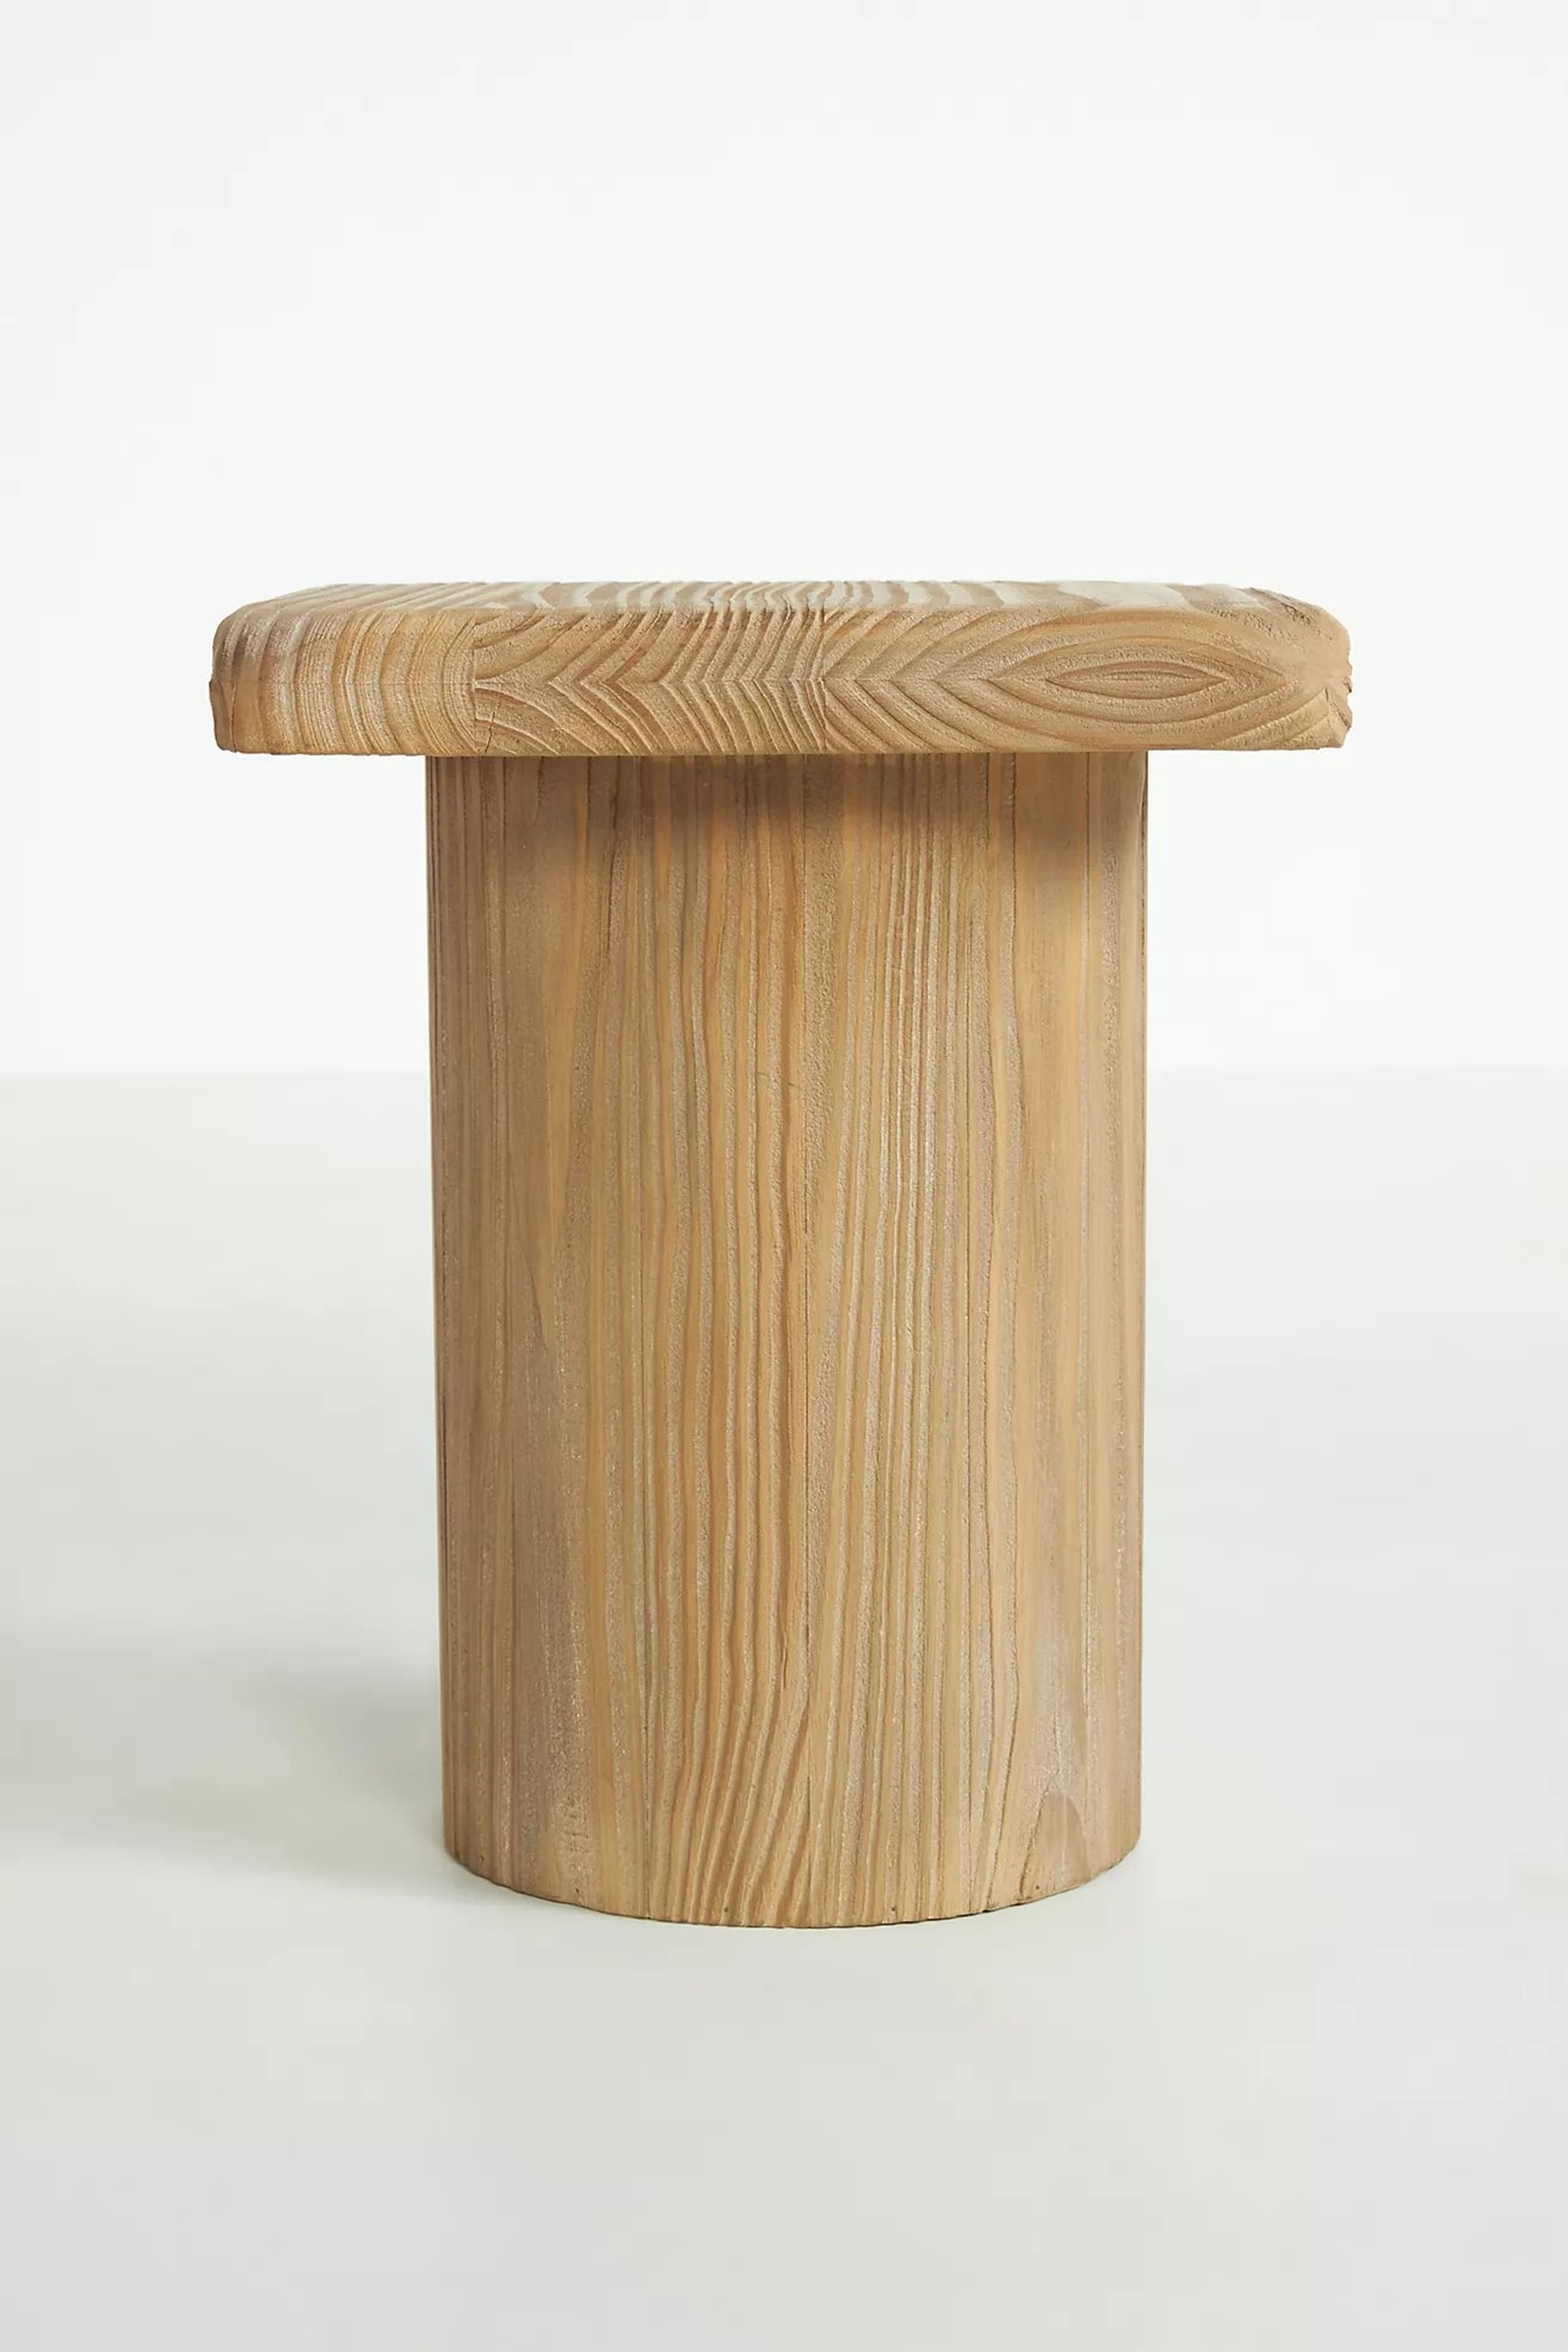 Margate Reclaimed Wood Side Table By Anthropologie in Beige - Anthropologie